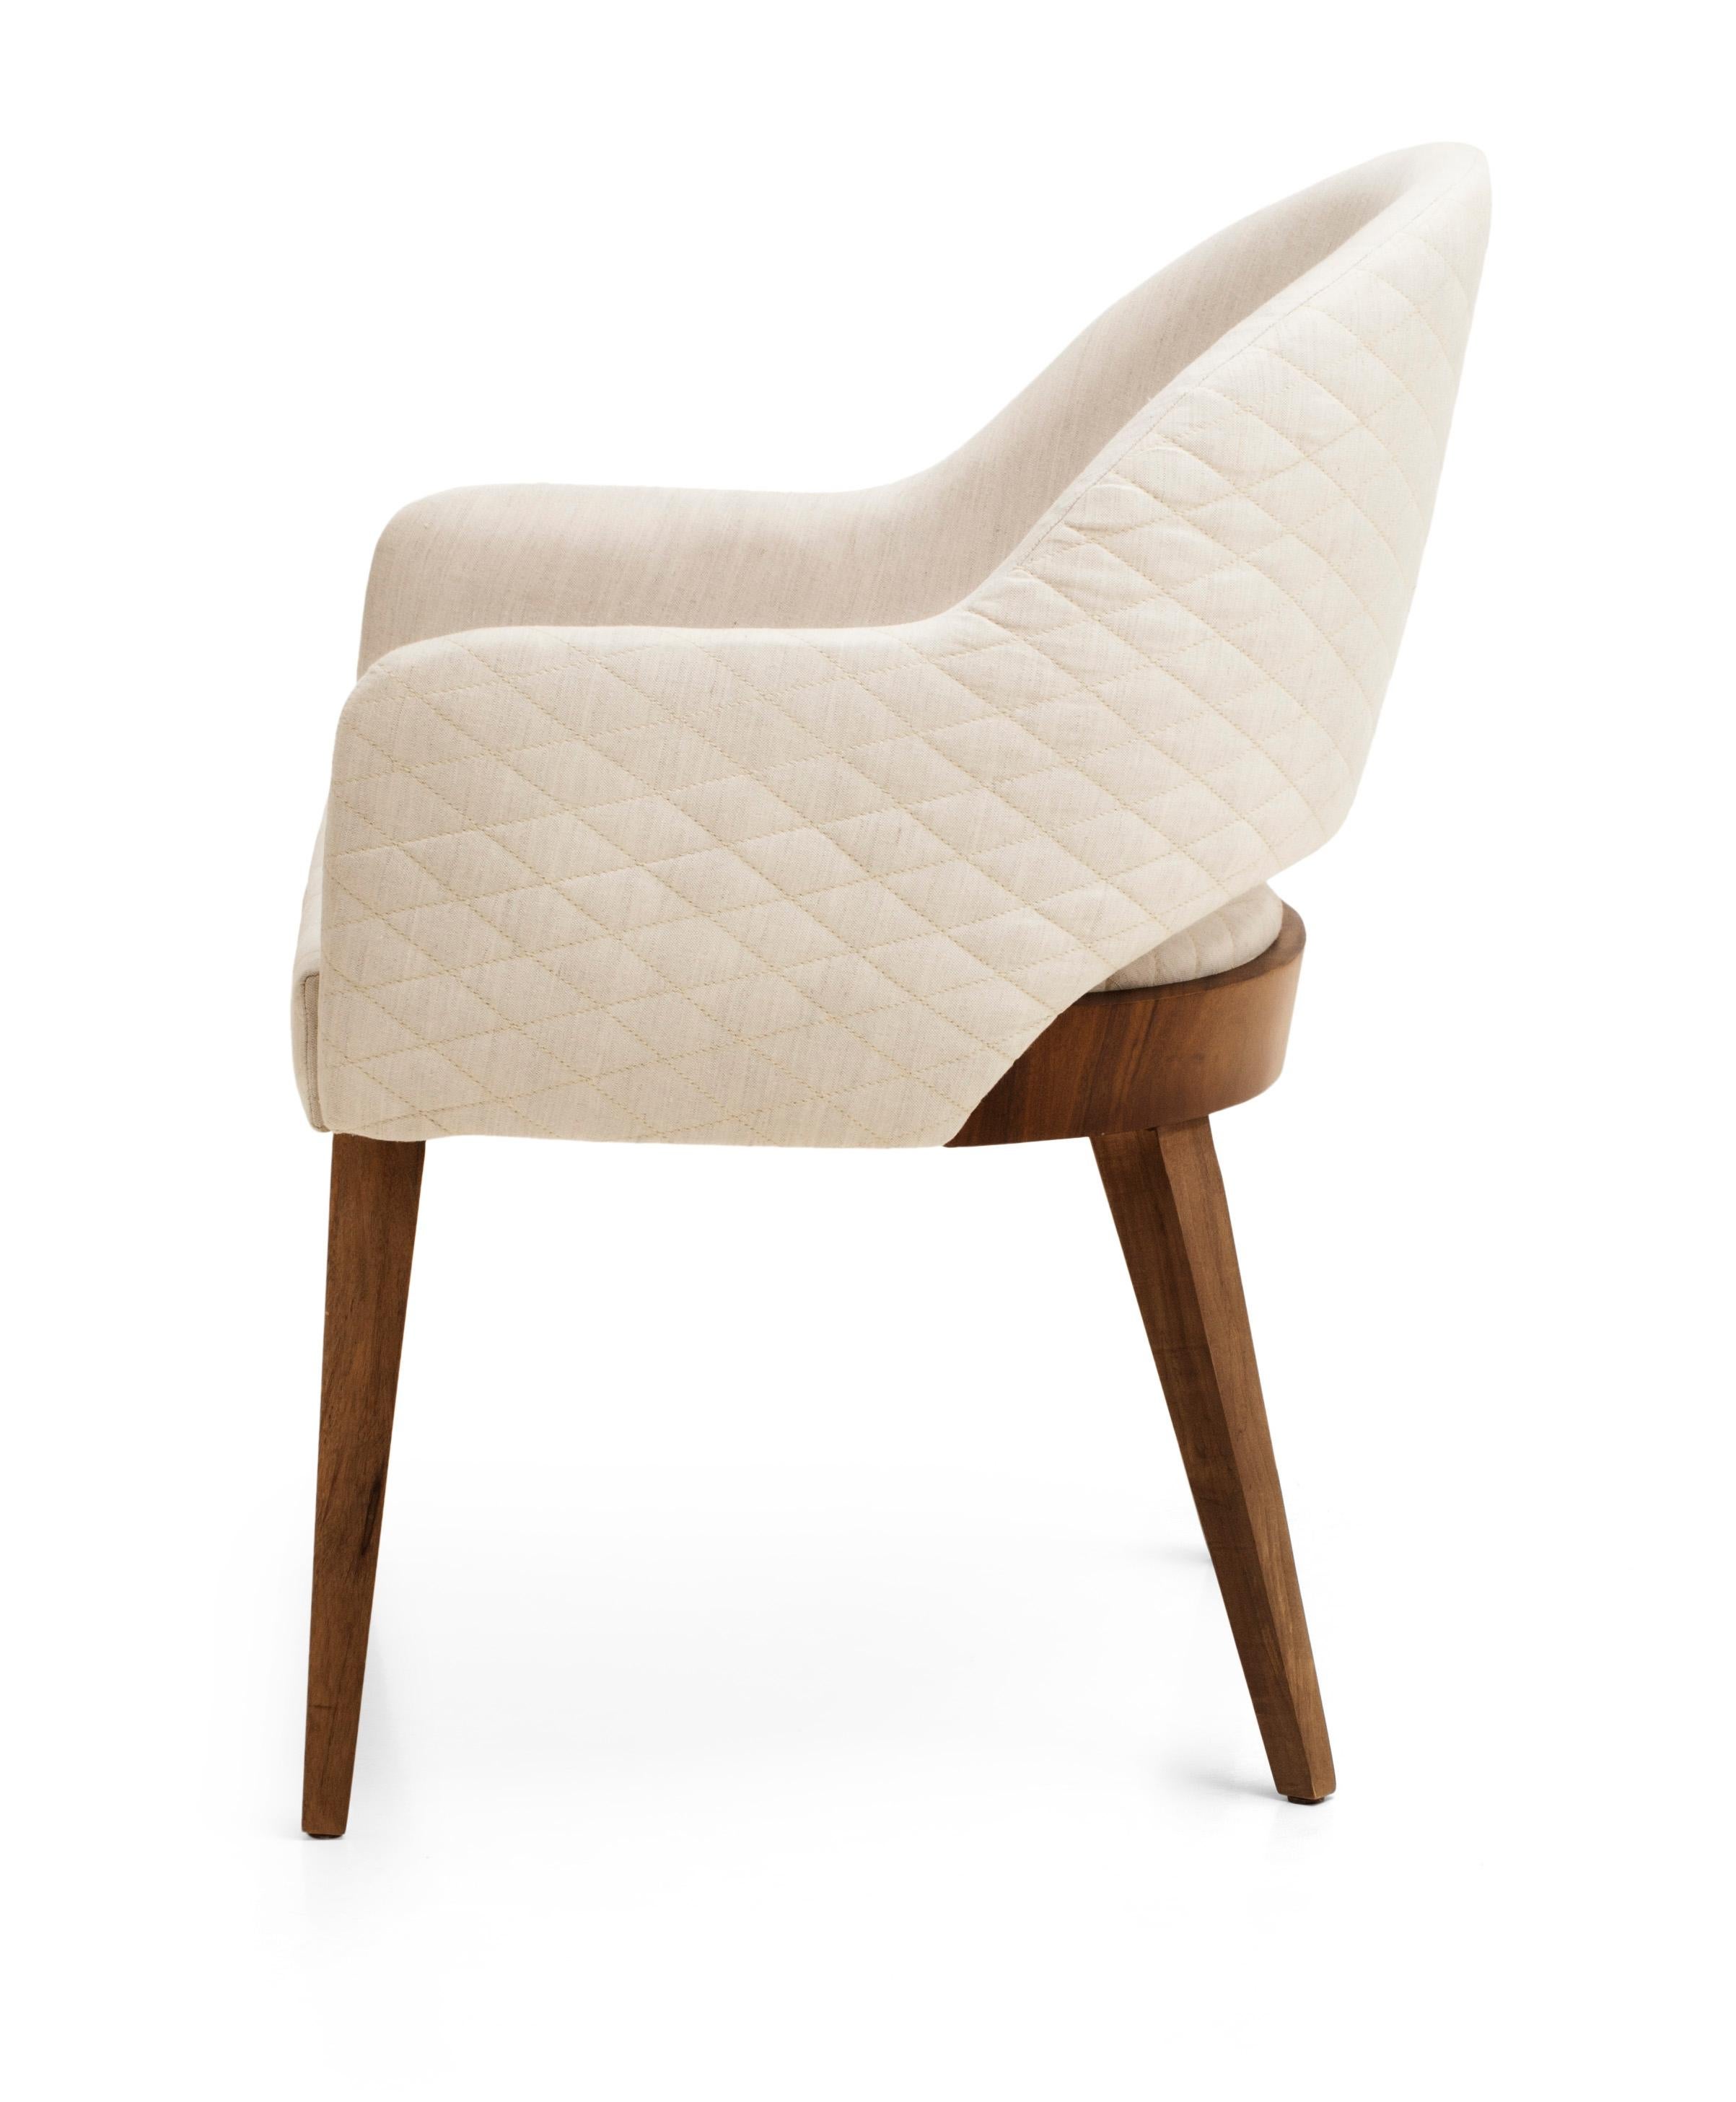 Eco dining chair evokes a retro and very sophisticated essence. With ergonomic seats and backs that hug the user, a piece can be manufactured in different coatings and finishes.

Note: during the purchase process, the client must choose the finishes